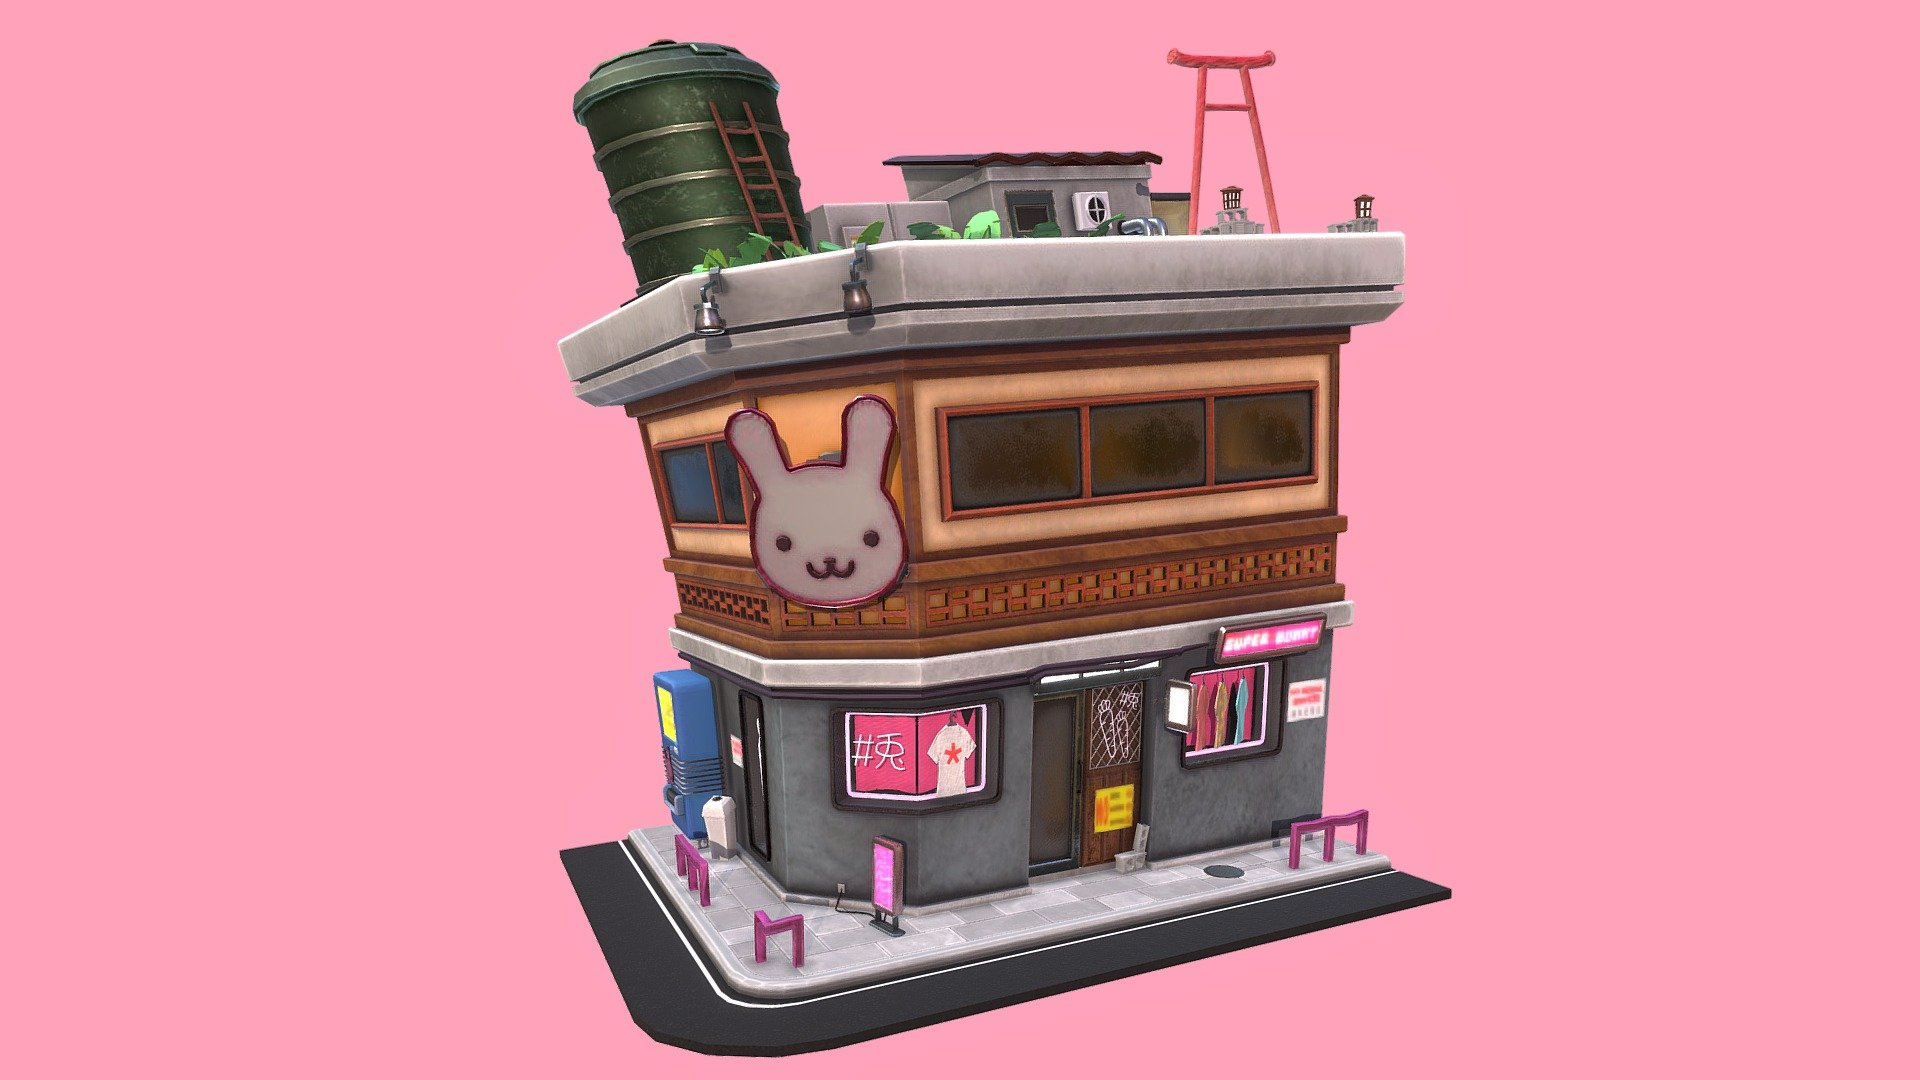 Another piece - a stylized Japanese corner shop / street corner, inspired by the &lsquo;XXXing Rabbits' store in Harajuku, Tokyo 3d model